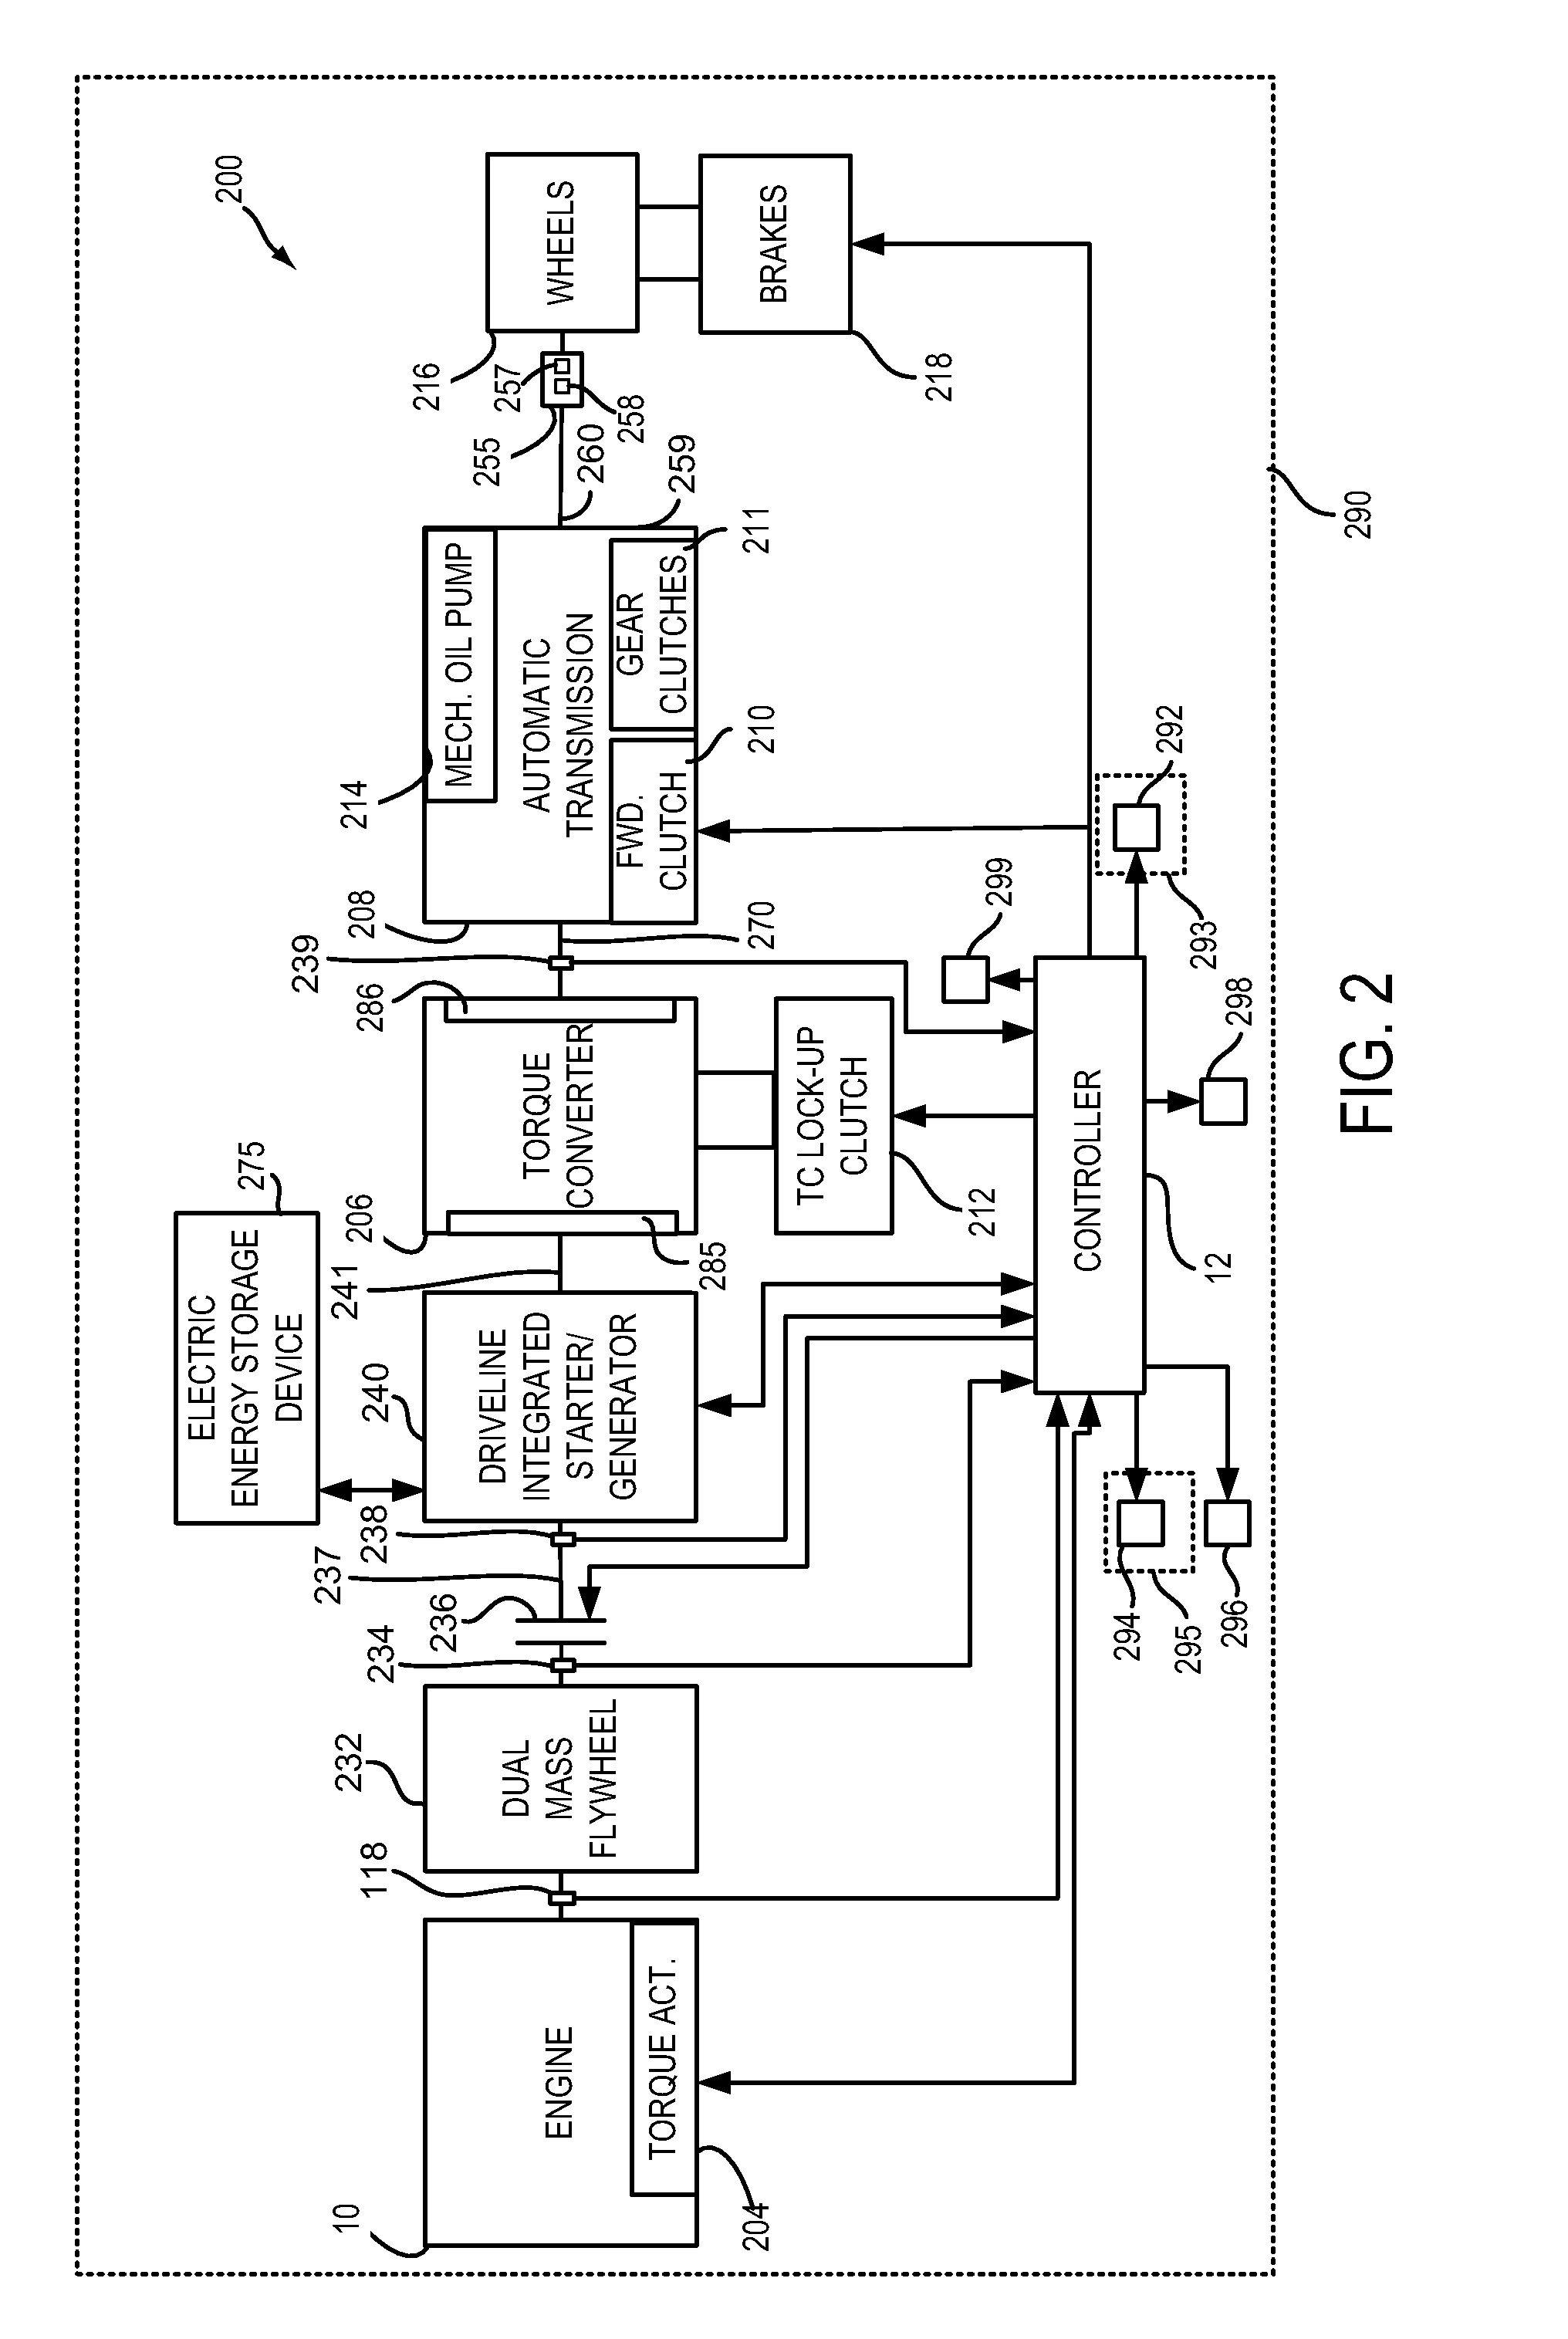 Methods and systems for operating a vehicle driveline